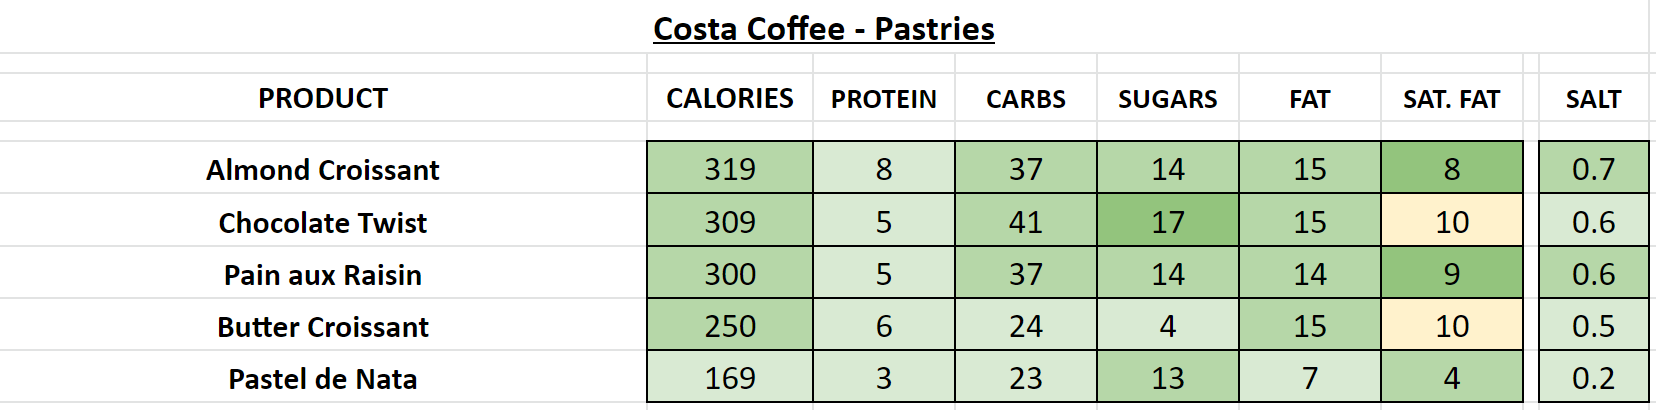 costa coffee pastries nutritional information calories